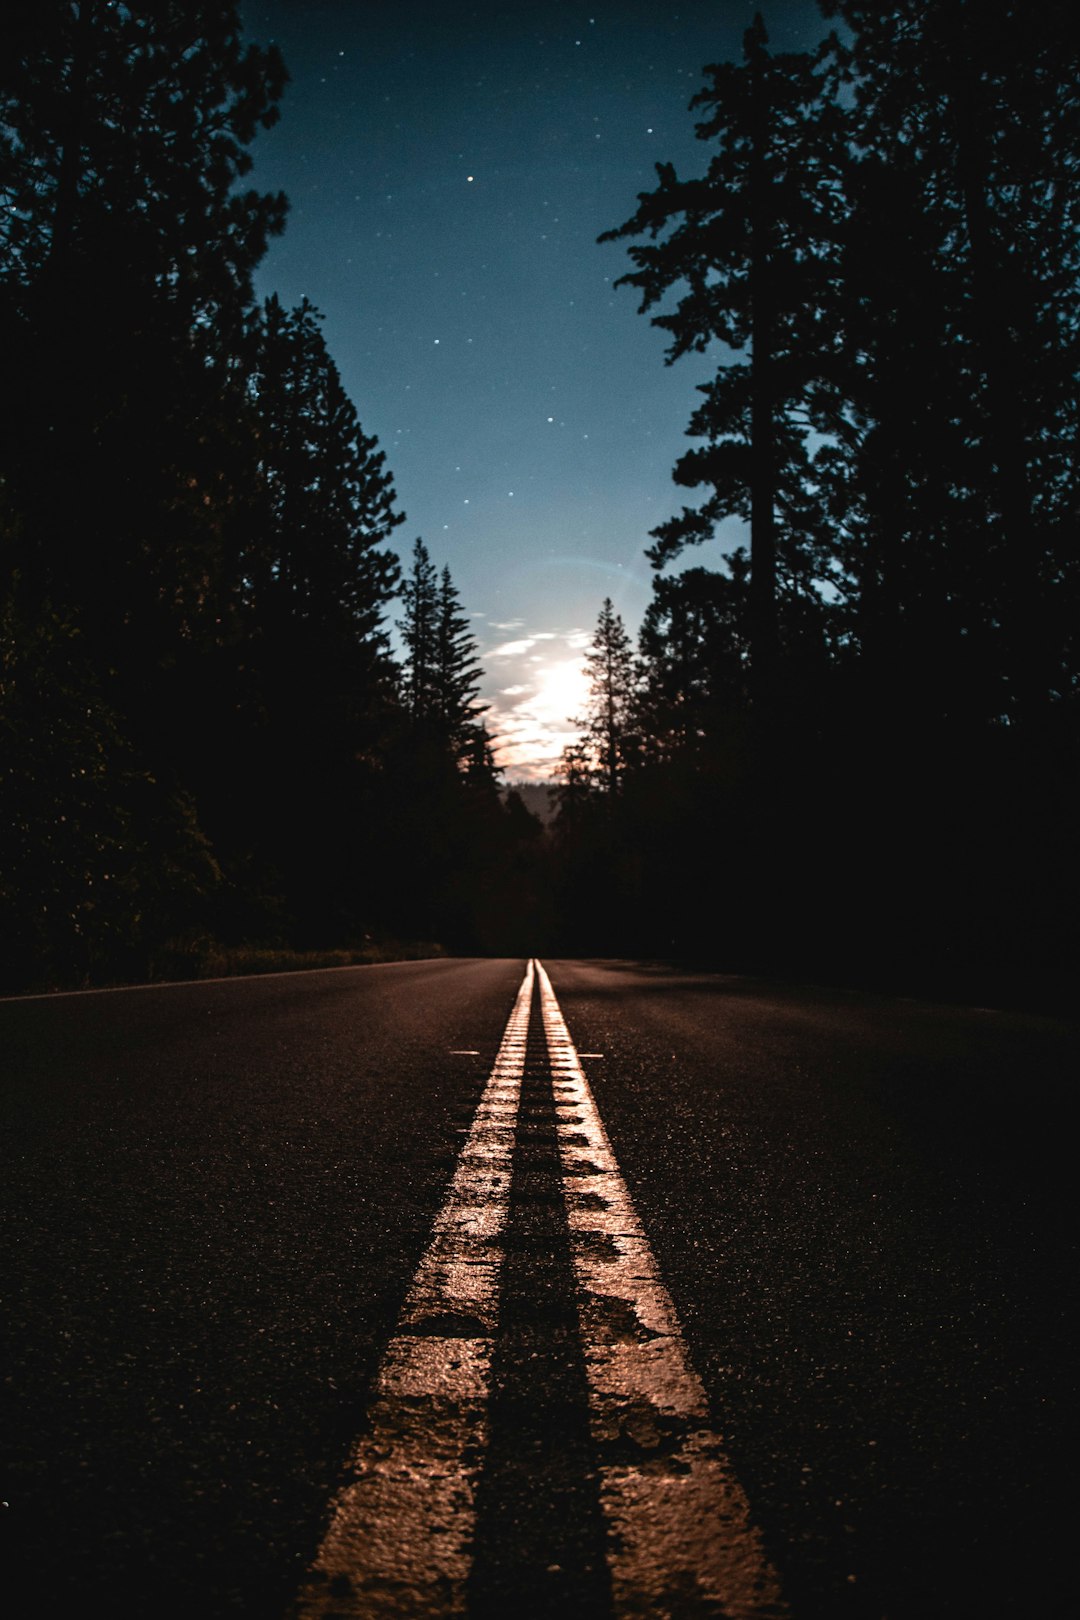 We were shooting Milky Way around midnight on our first night in Yosemite. We came across this straight away where the full moon happened to be perfectly framed in the dead middle of the road. I told my buddy to stop the car so we could get out and take shots of this once in a lifetime moment.